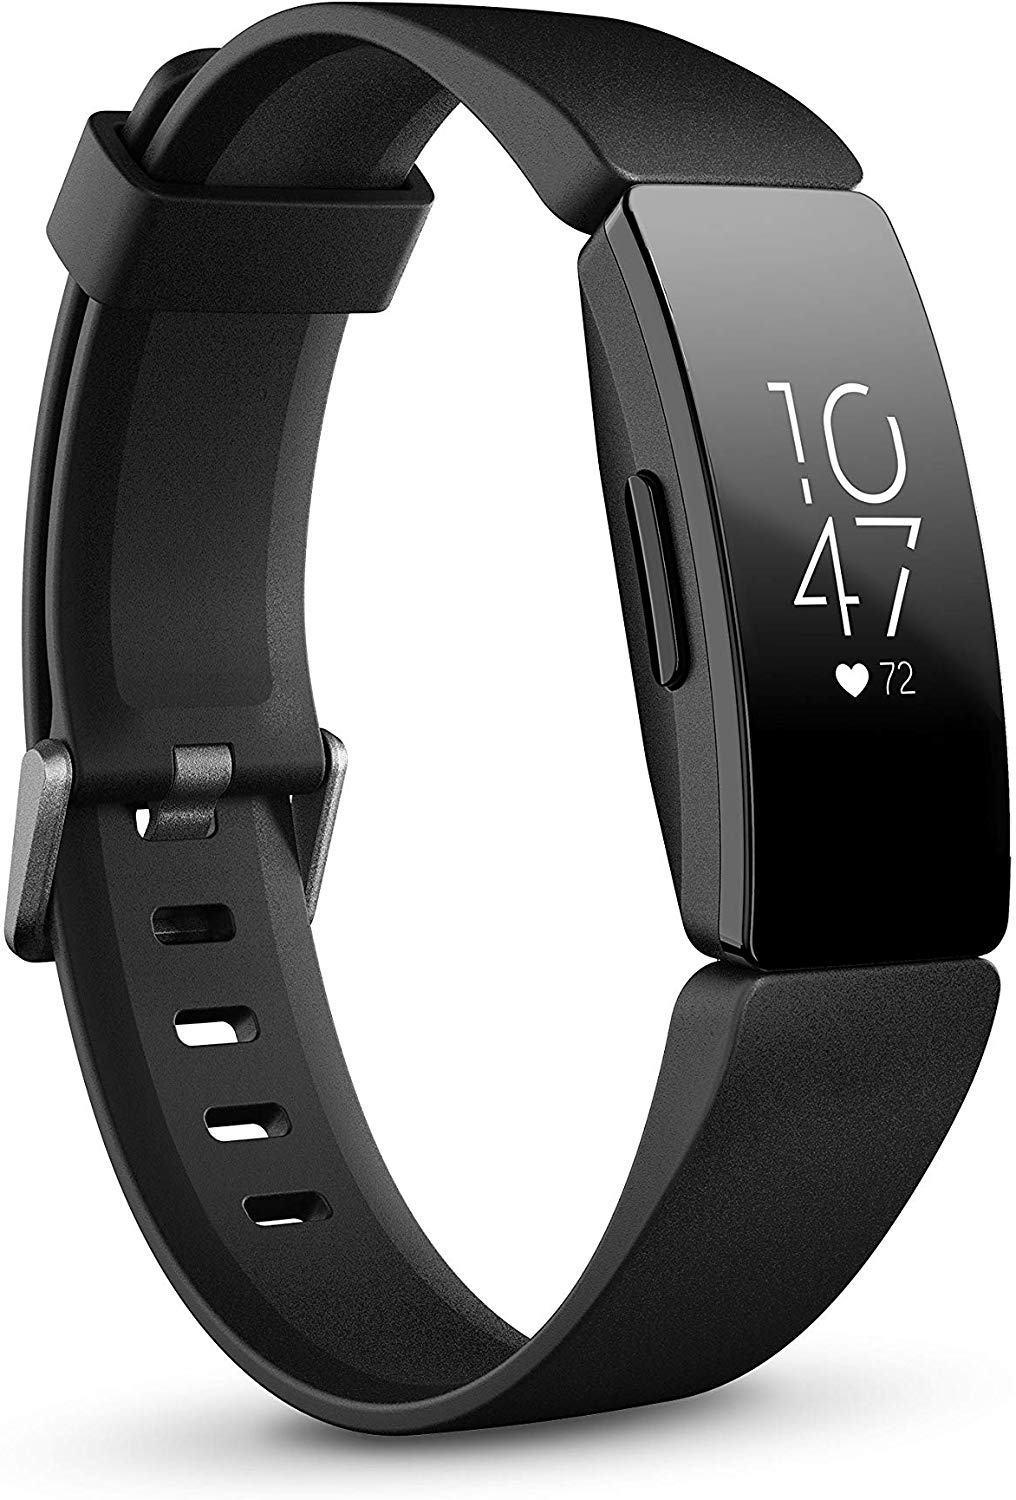 Fitbit Inspire HR Heart Rate Monitor